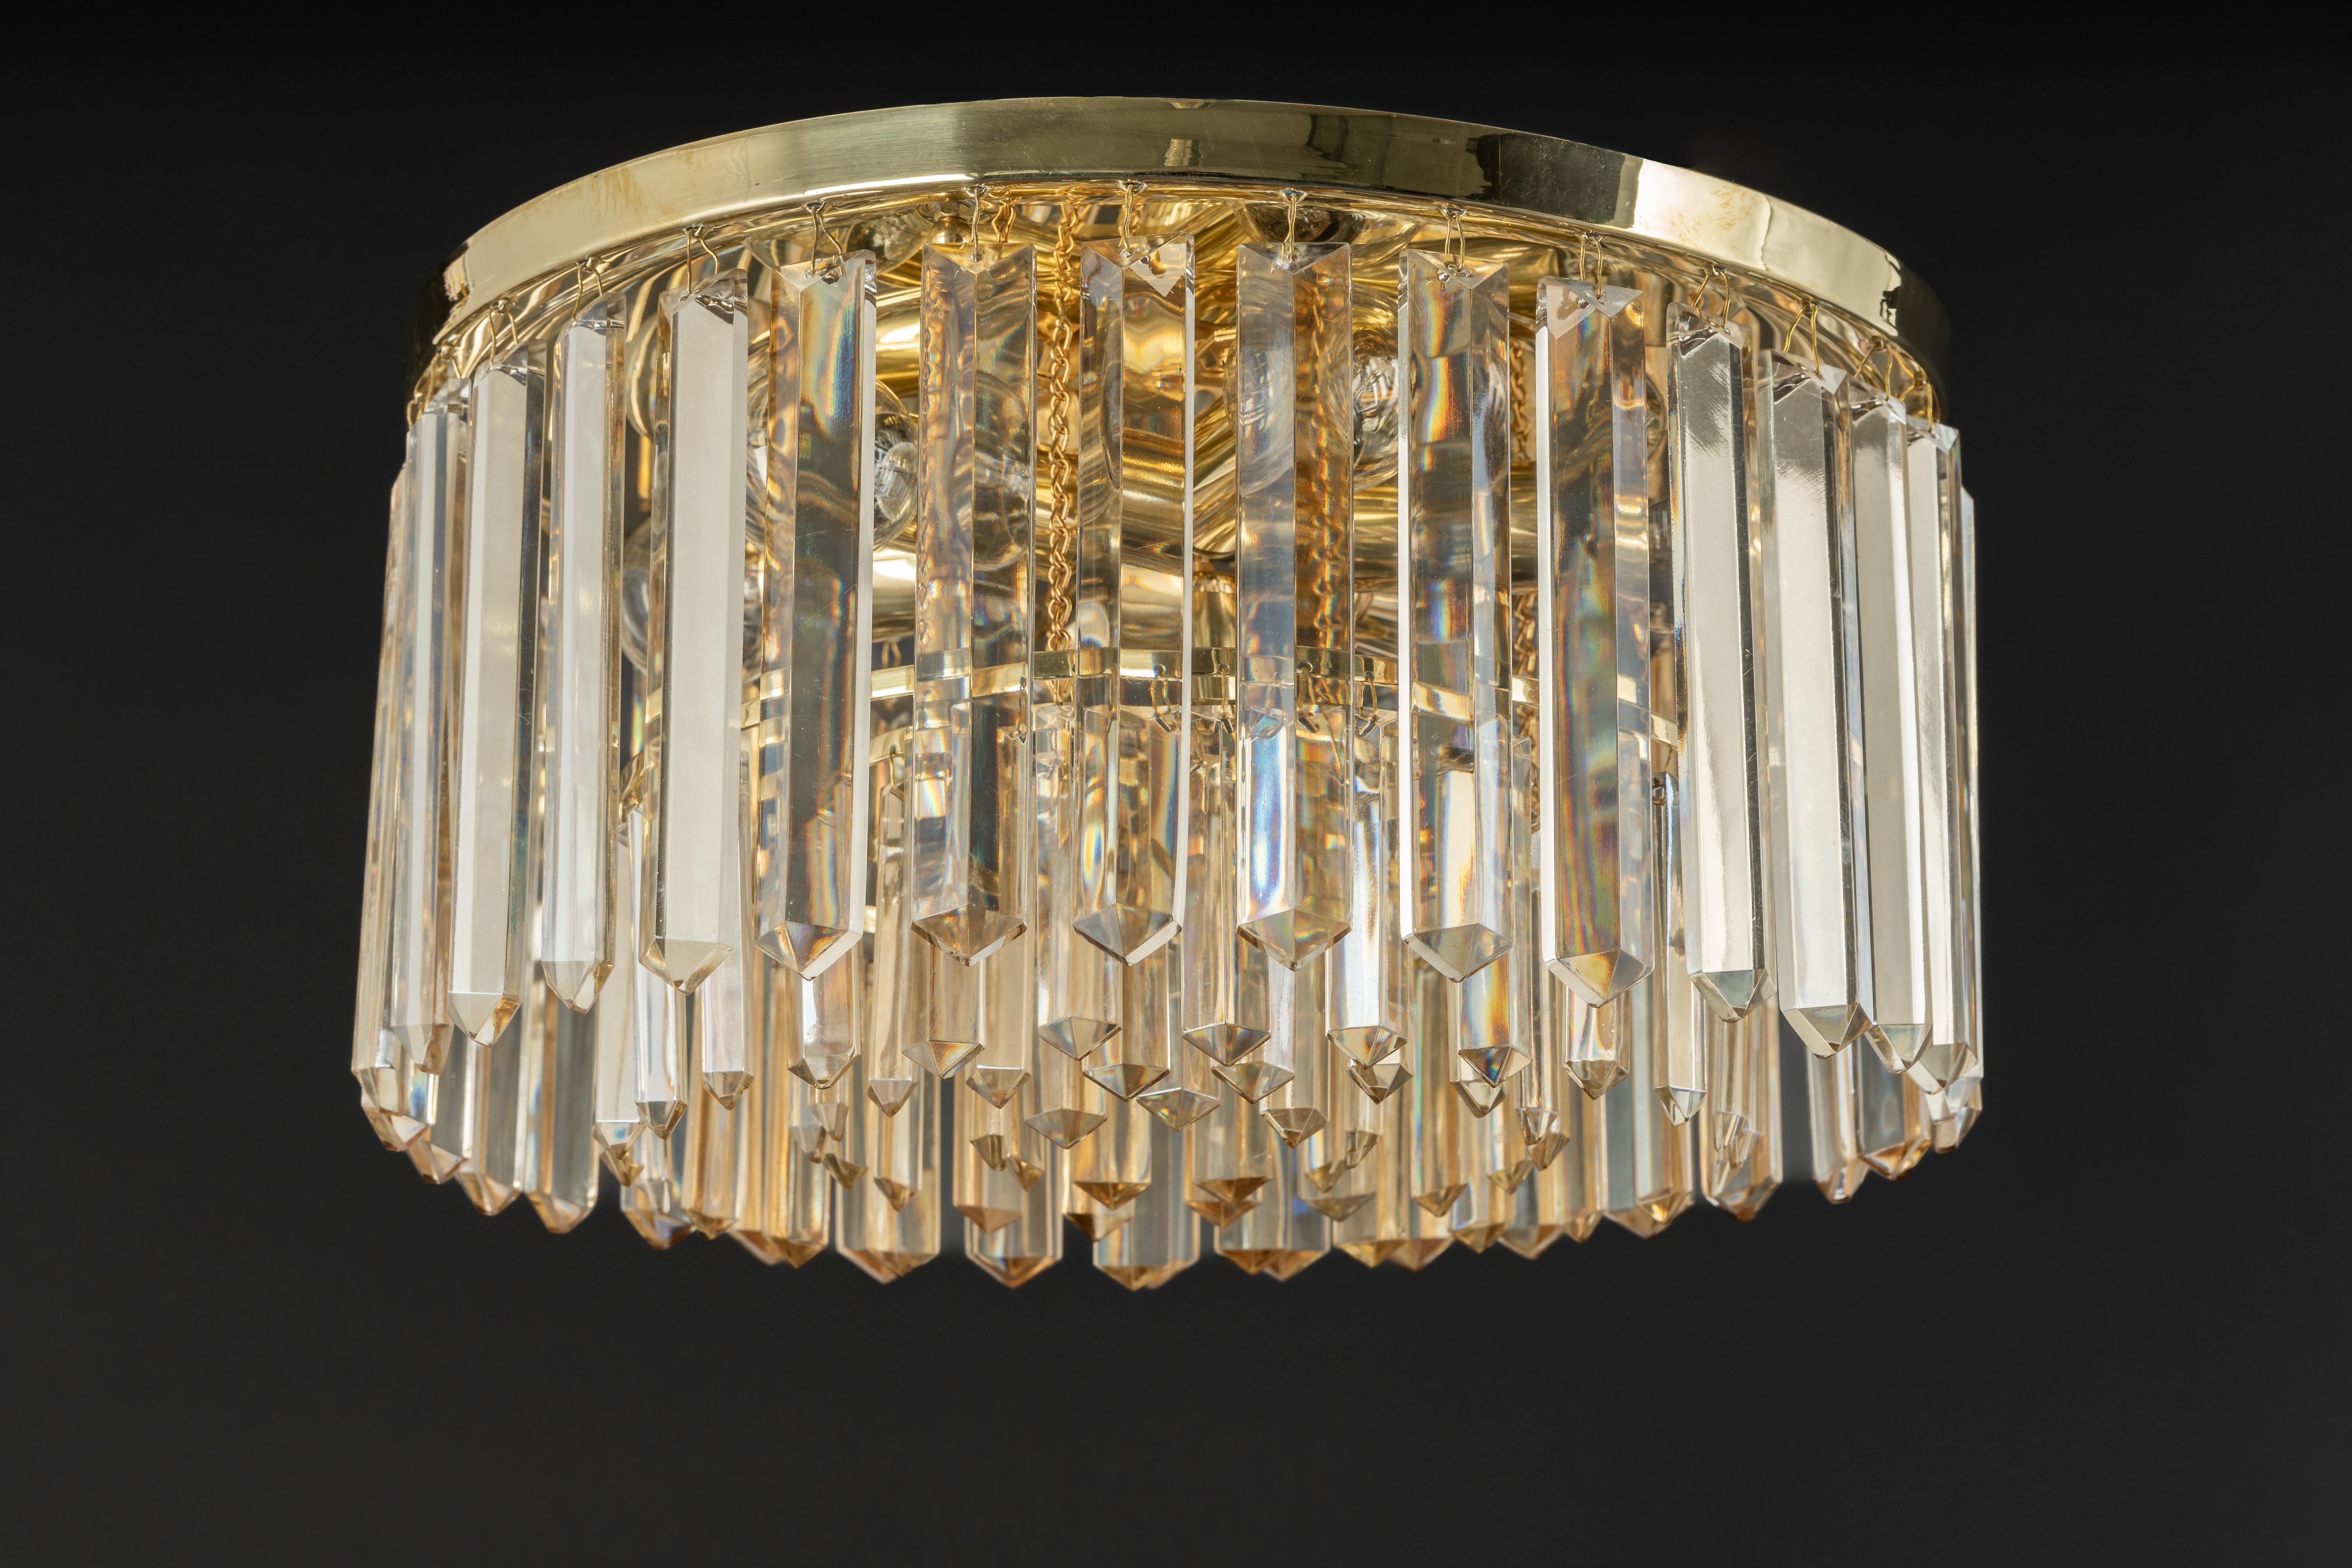 A wonderful petite flush mount light fixture by Palwa, Germany, 1970s.
It is made of a brass frame decorated with large size of crystals. Wonderful light effect.

The lamp takes 7 x E14 (Small Bulbs up to 40 Watts each)
Light bulbs are not